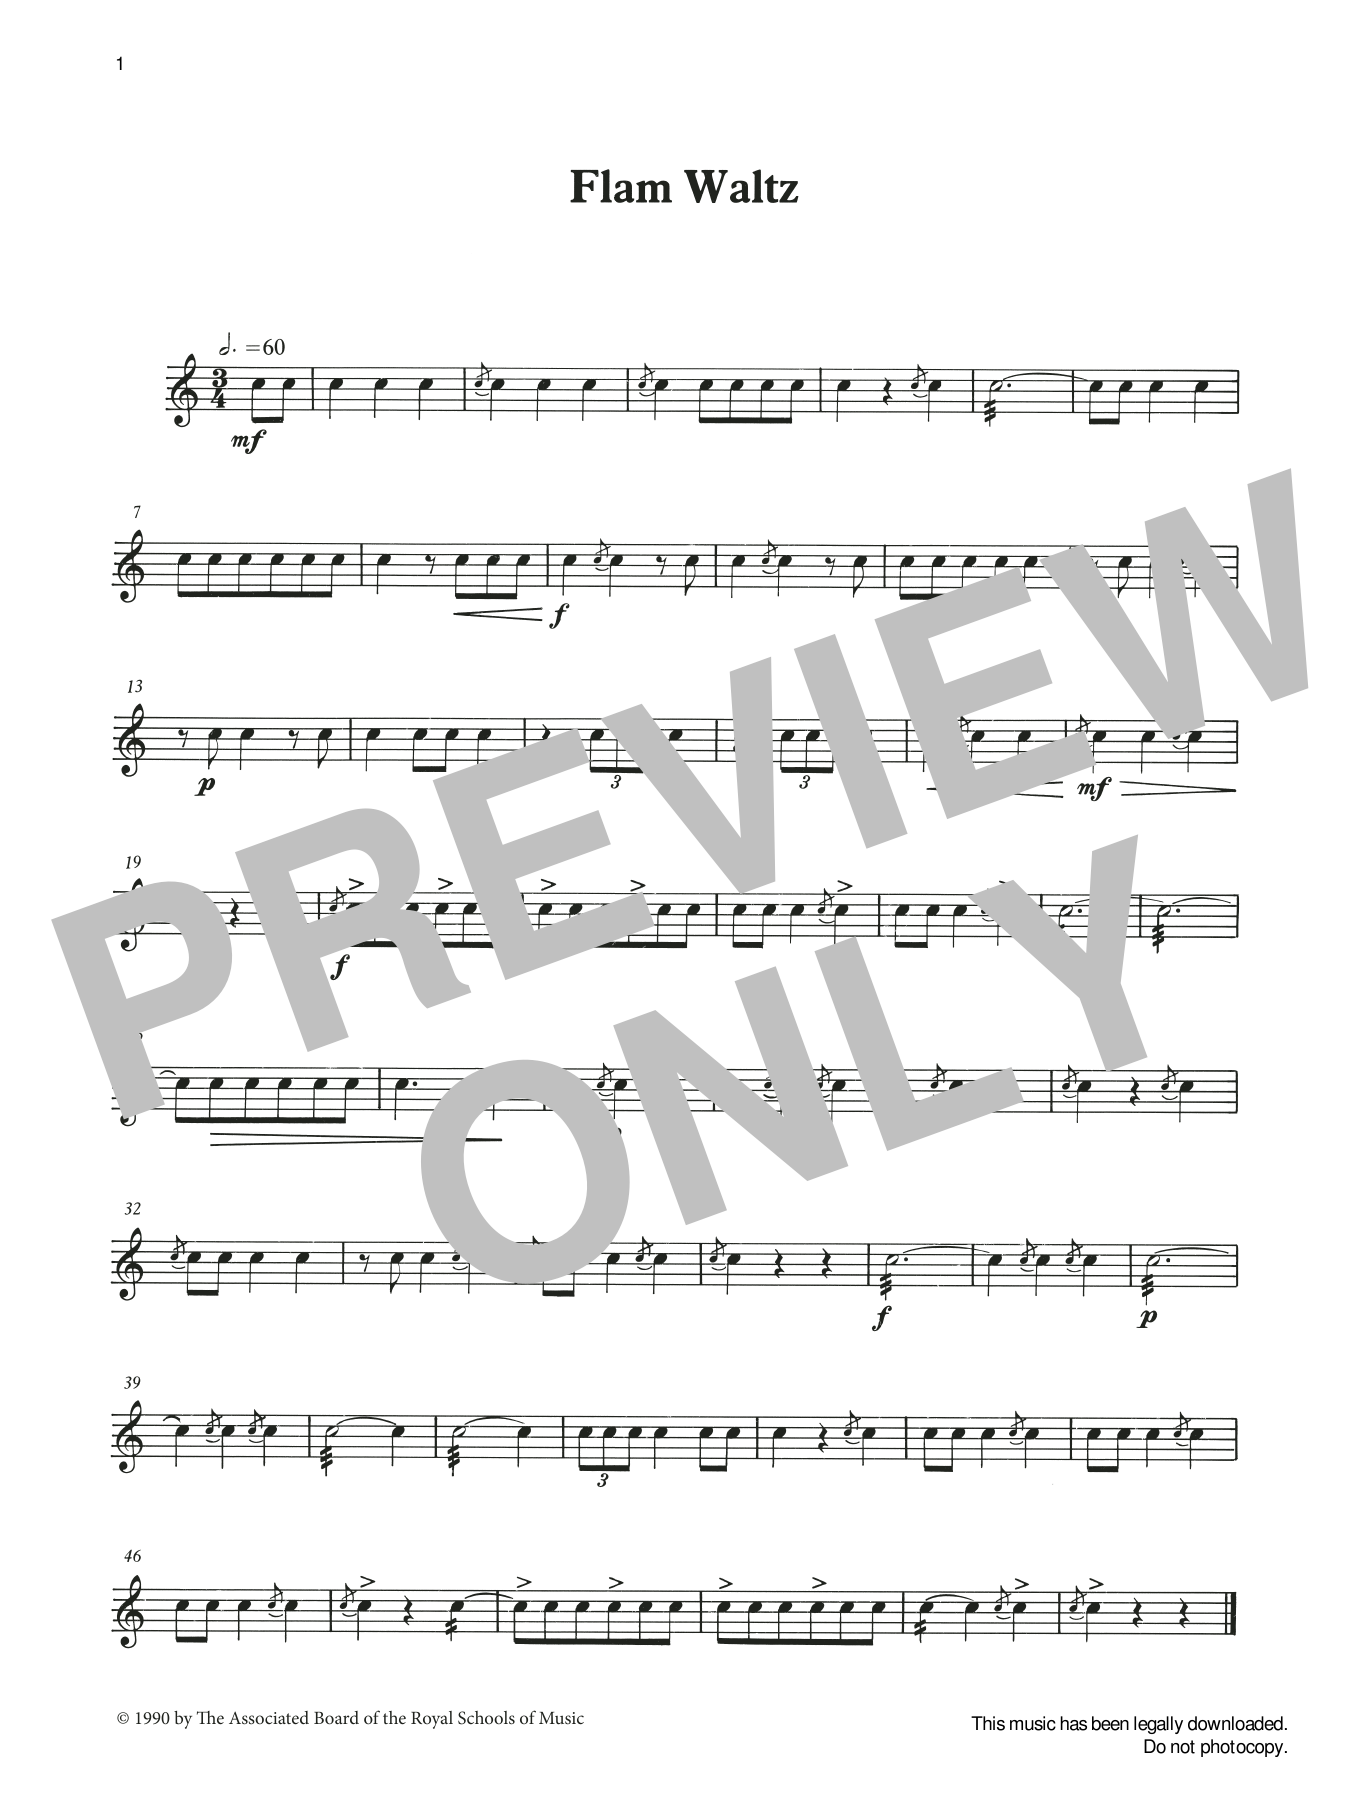 Flam Waltz from Graded Music for Snare Drum, Book II (Percussion Solo) von Ian Wright and Kevin Hathaway